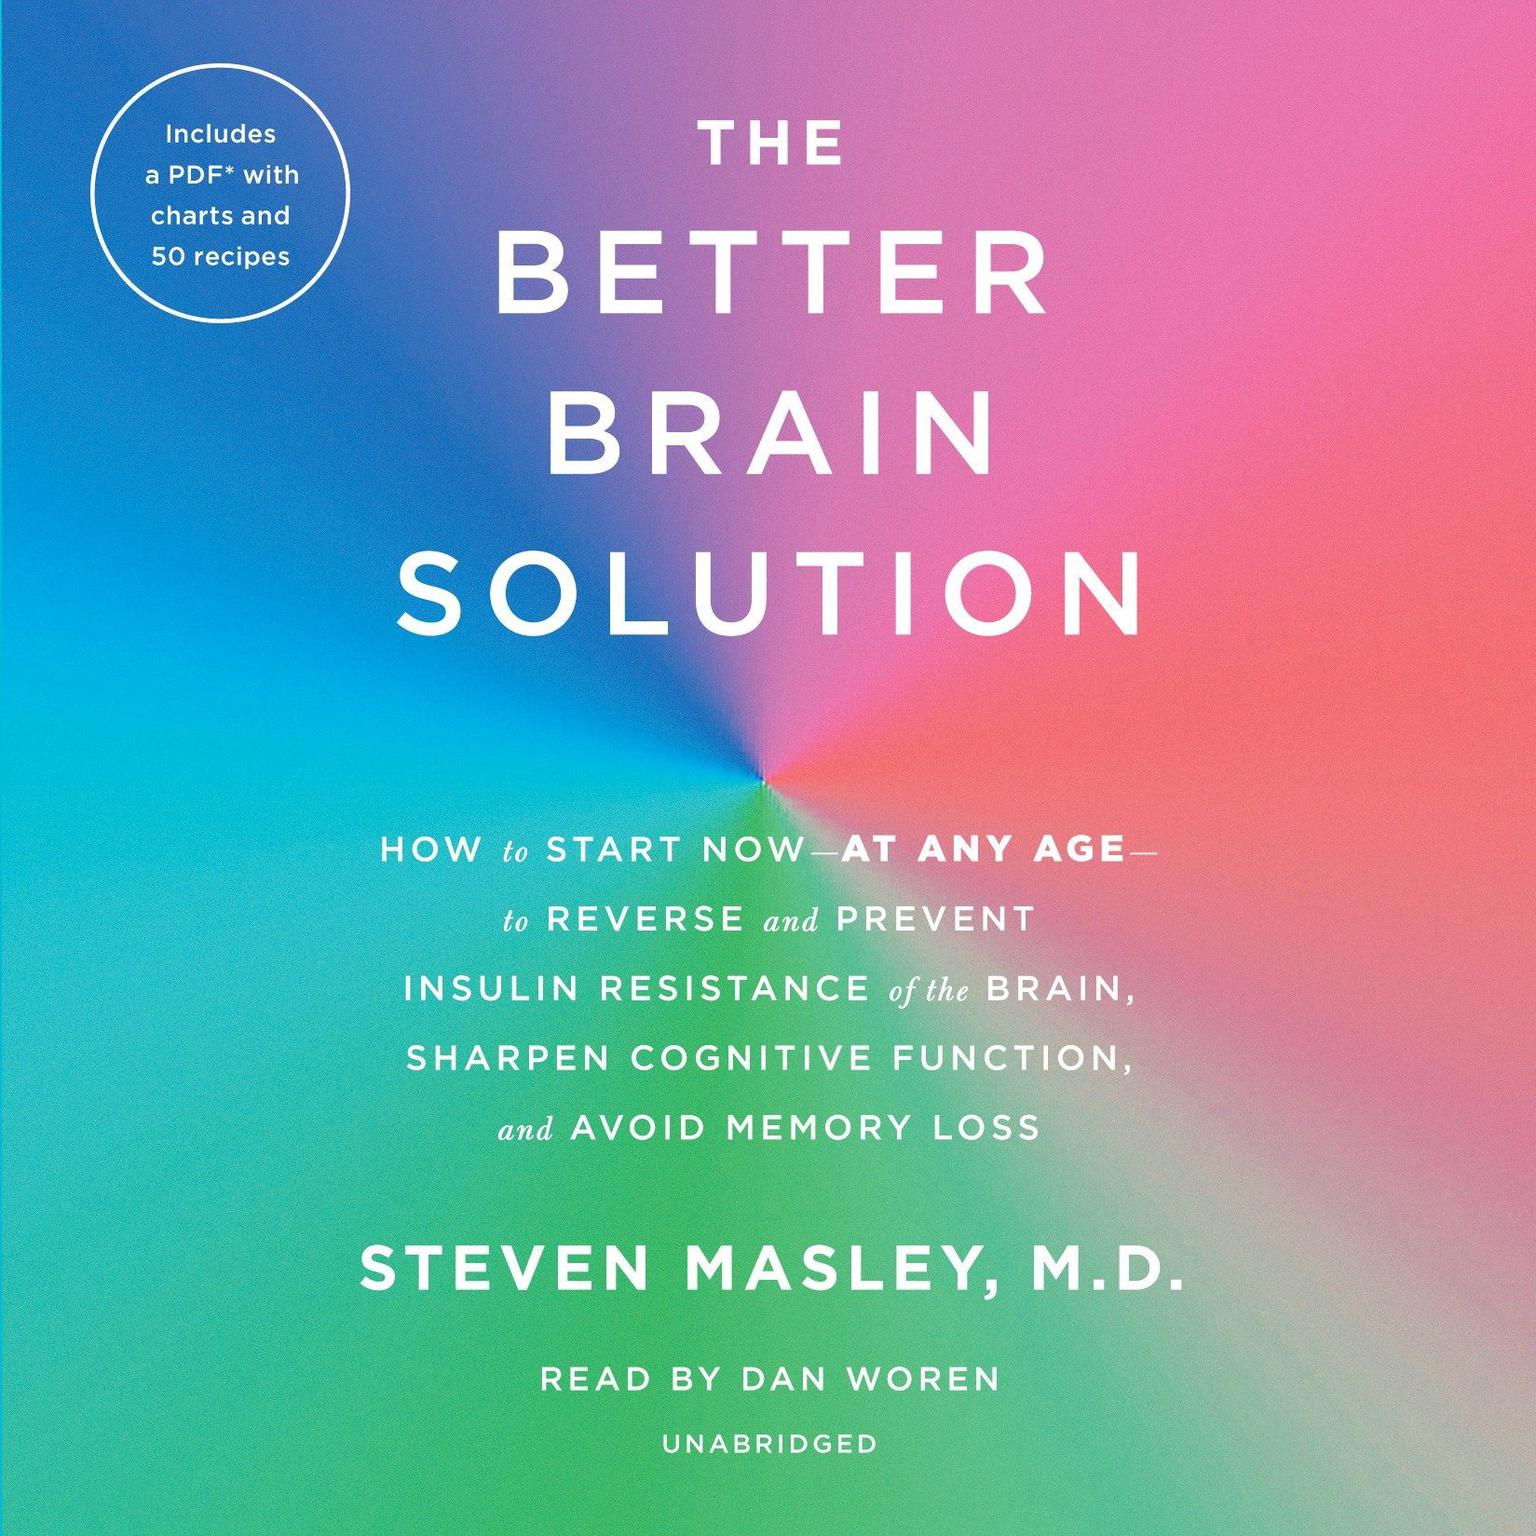 The Better Brain Solution: How to Start Now--at Any Age--to Reverse and Prevent Insulin Resistance of the Brain, Sharpen Cognitive Function, and Avoid Memory Loss Audiobook, by Steven Masley